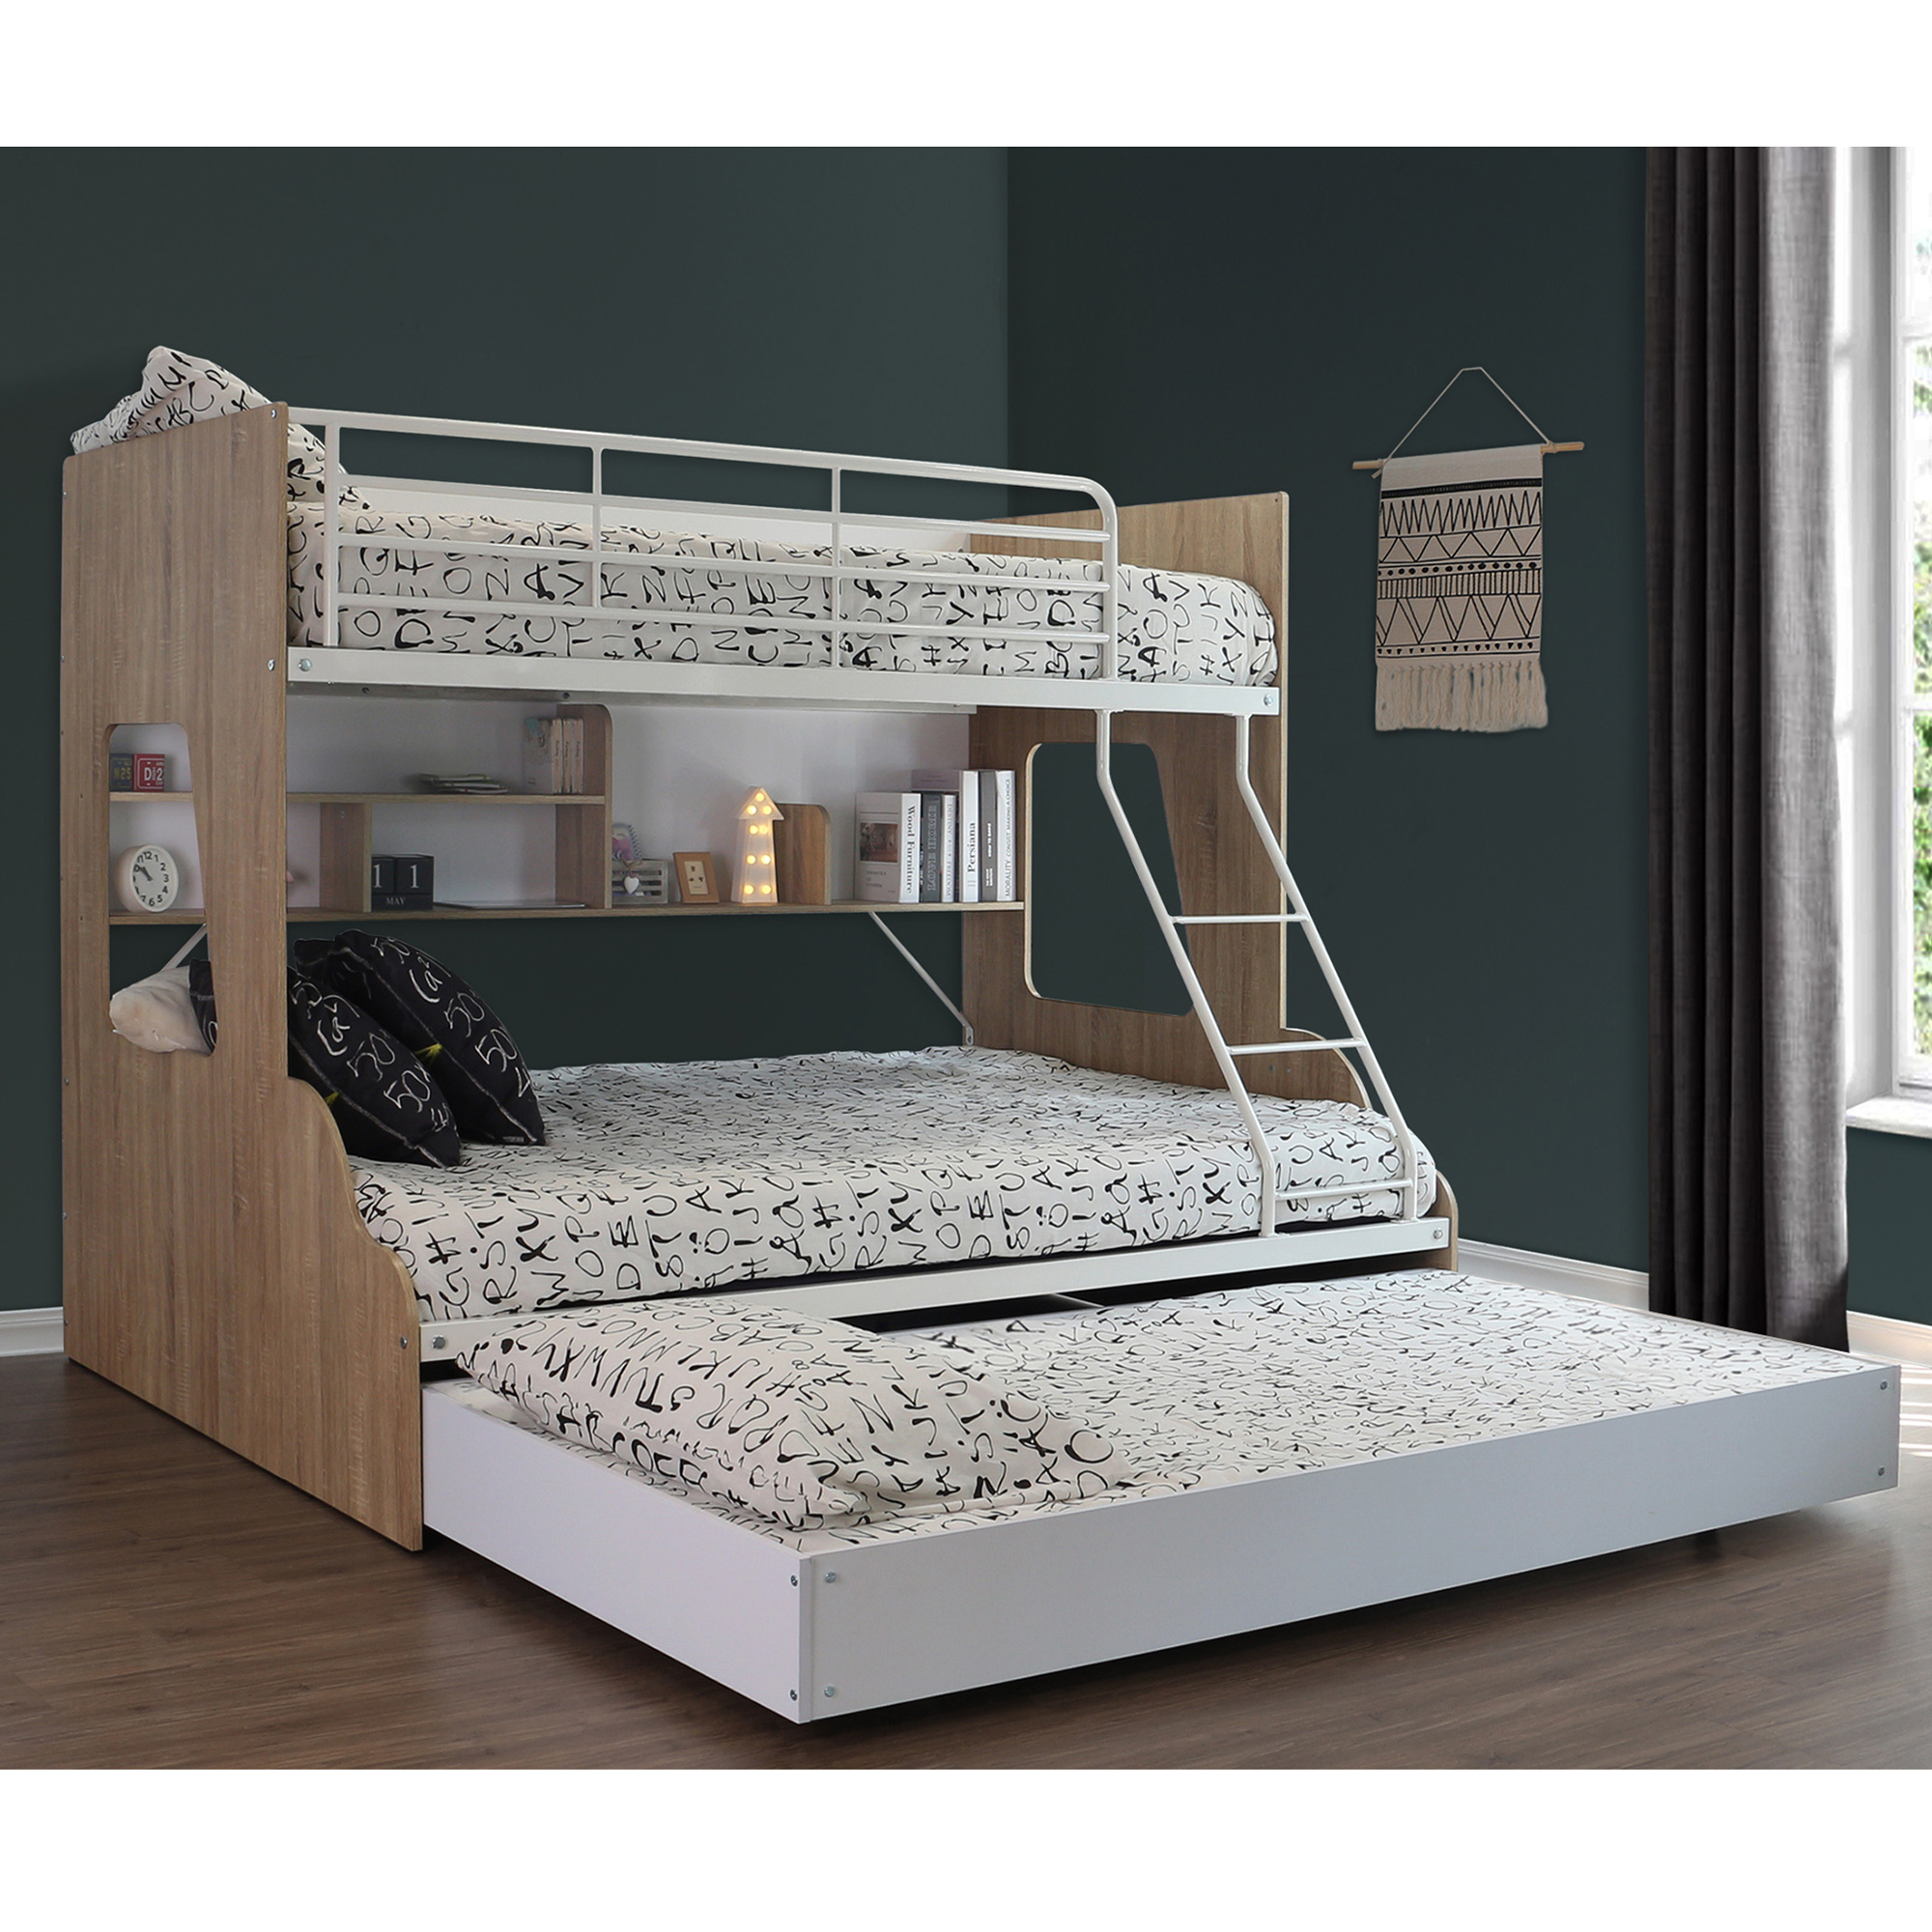 Single Over Double Trio Bunk Bed, Bunk Beds Double On Bottom Single Top